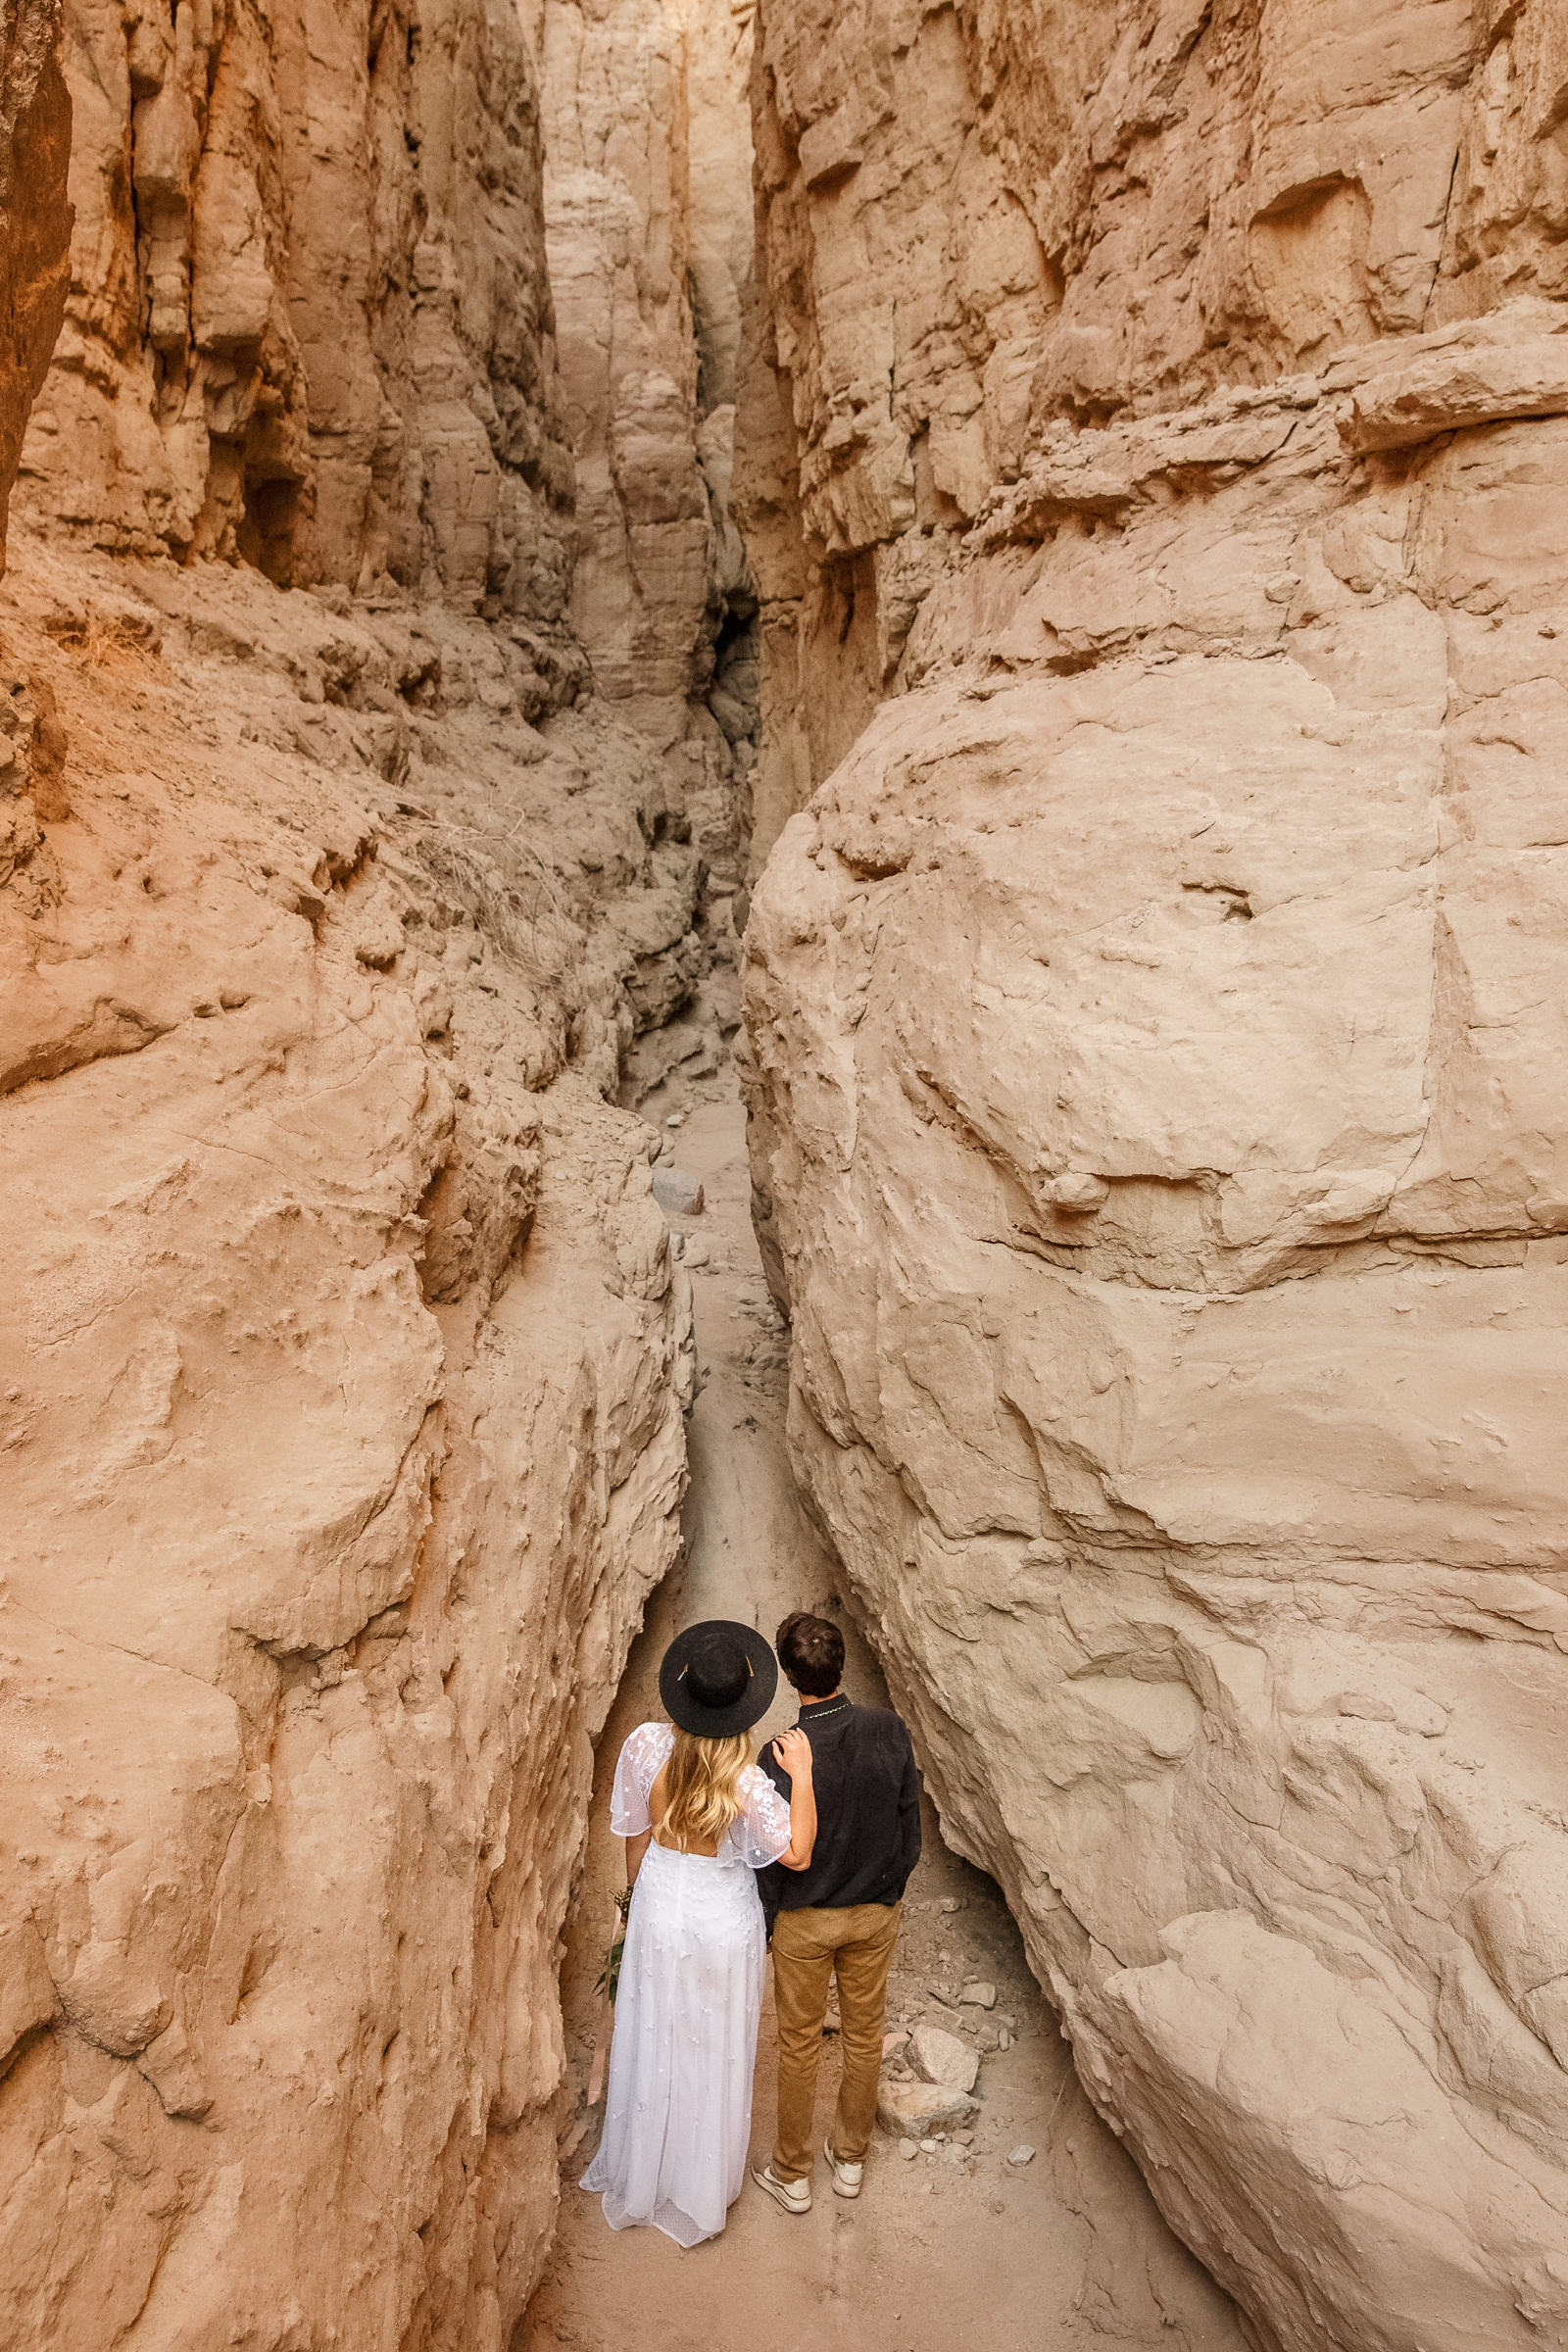 The Bride & Groom take a moment to enjoy their outdoor adventure slot canyon elopement.